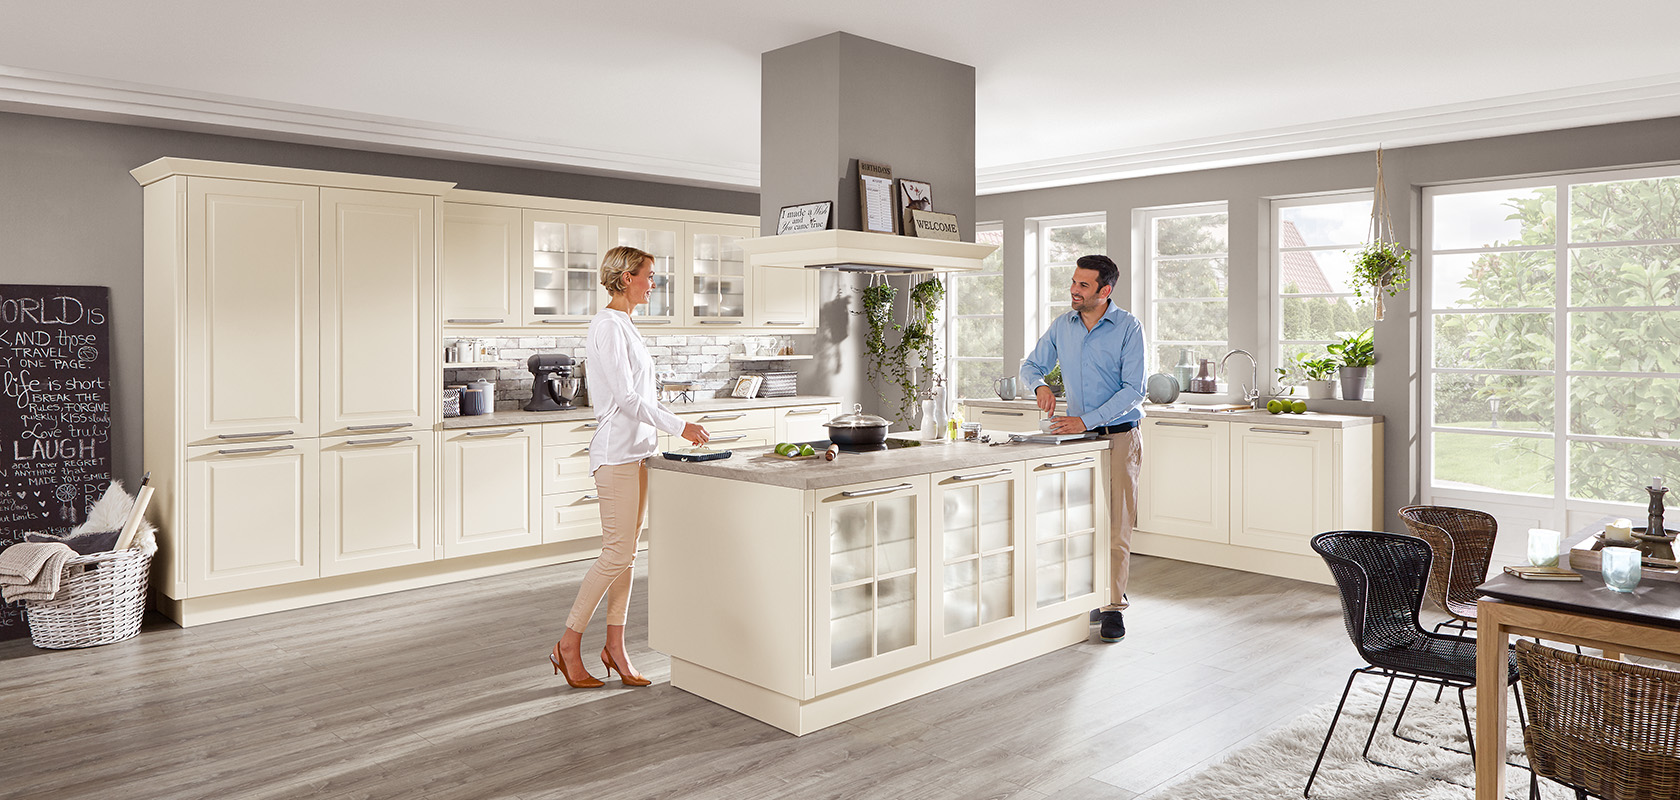 A bright, spacious kitchen with classic cabinetry and a central island, with two individuals engaged in cheerful conversation amidst meal preparation.